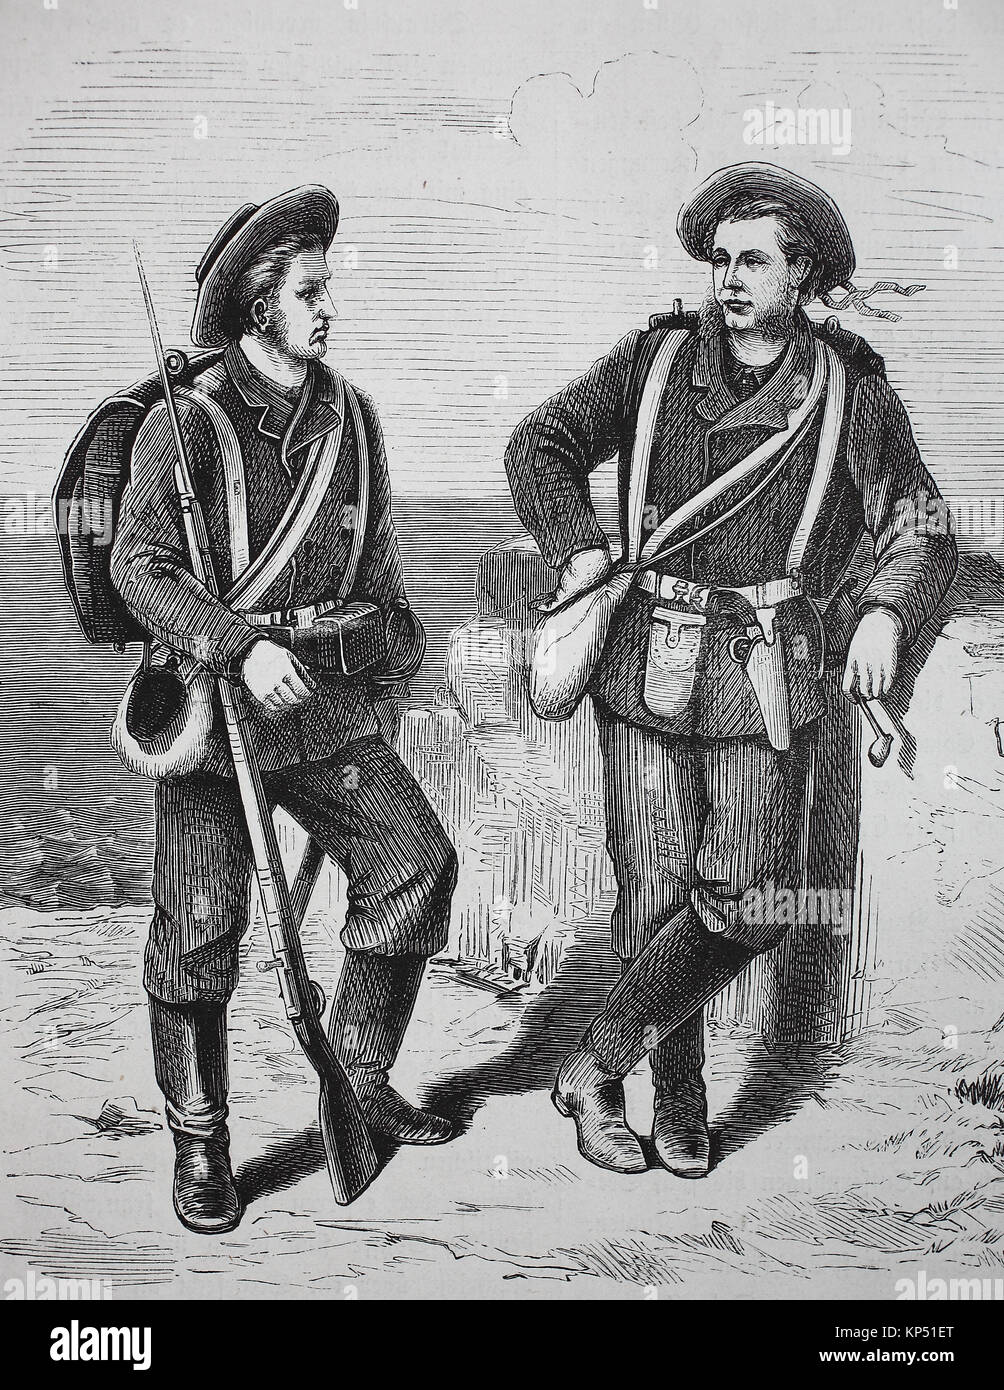 Two soldiers in the uniform of the German Sea Defence, 1870, time of the Franco-Prussian War or Franco-German War, Deutsch-Franzoesischer Krieg, 1870 - 1871, digital improved reproduction of an original woodcut from 1871 Stock Photo